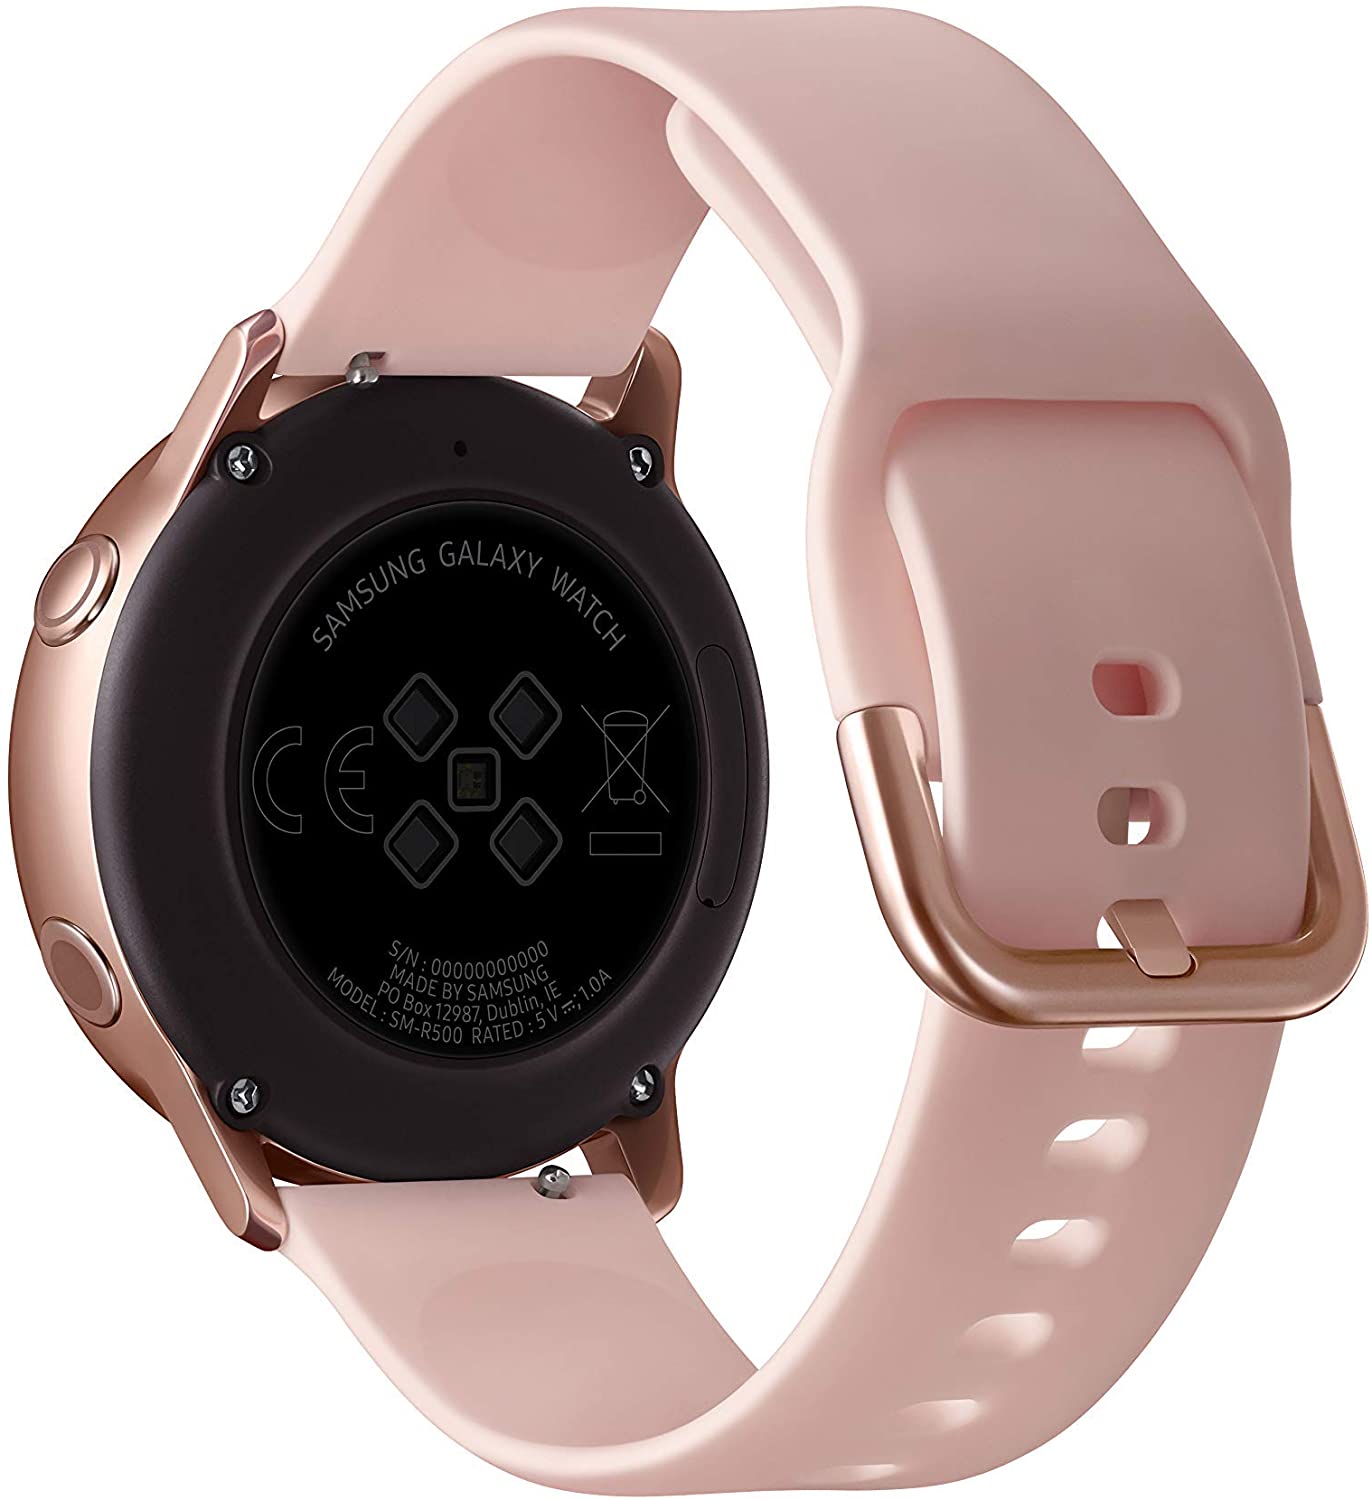 Samsung SM-R500NZDCXAR-RB Galaxy Watch Active 40mm Rose Gold - Certified Refurbished